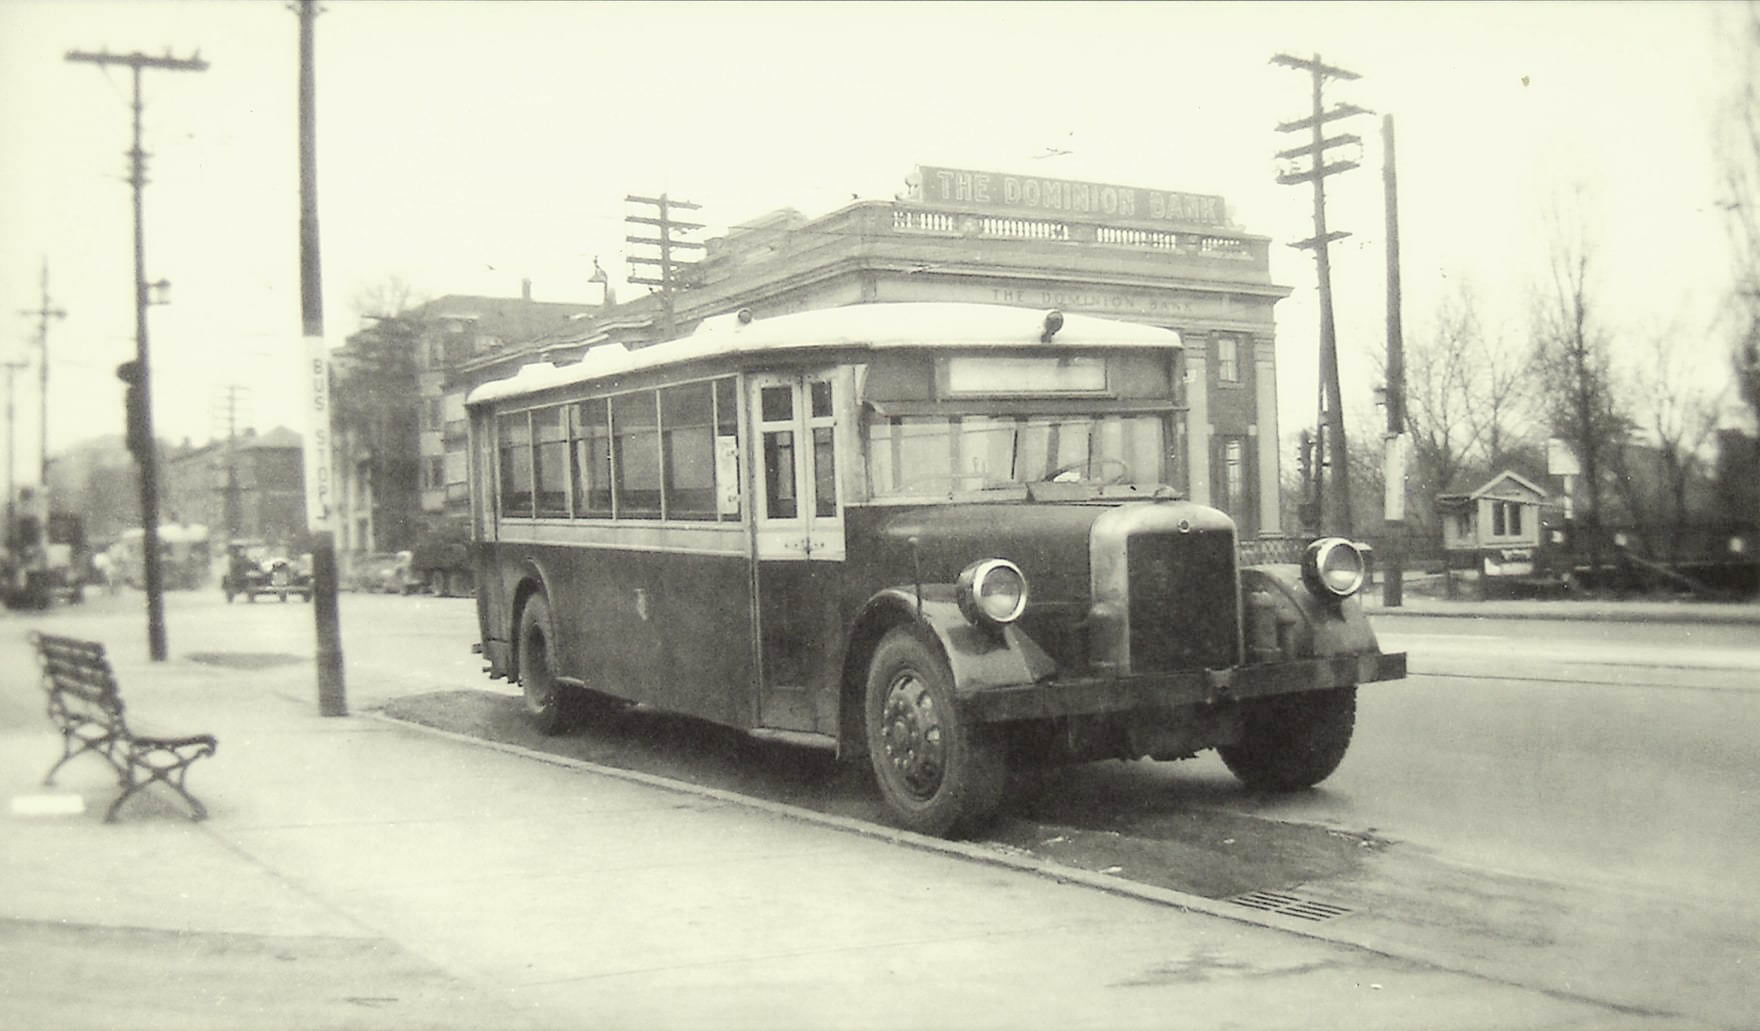 A TTC bus parked on the south side of Bloor St. E., view looking northwest to Sherbourne St., 1945.